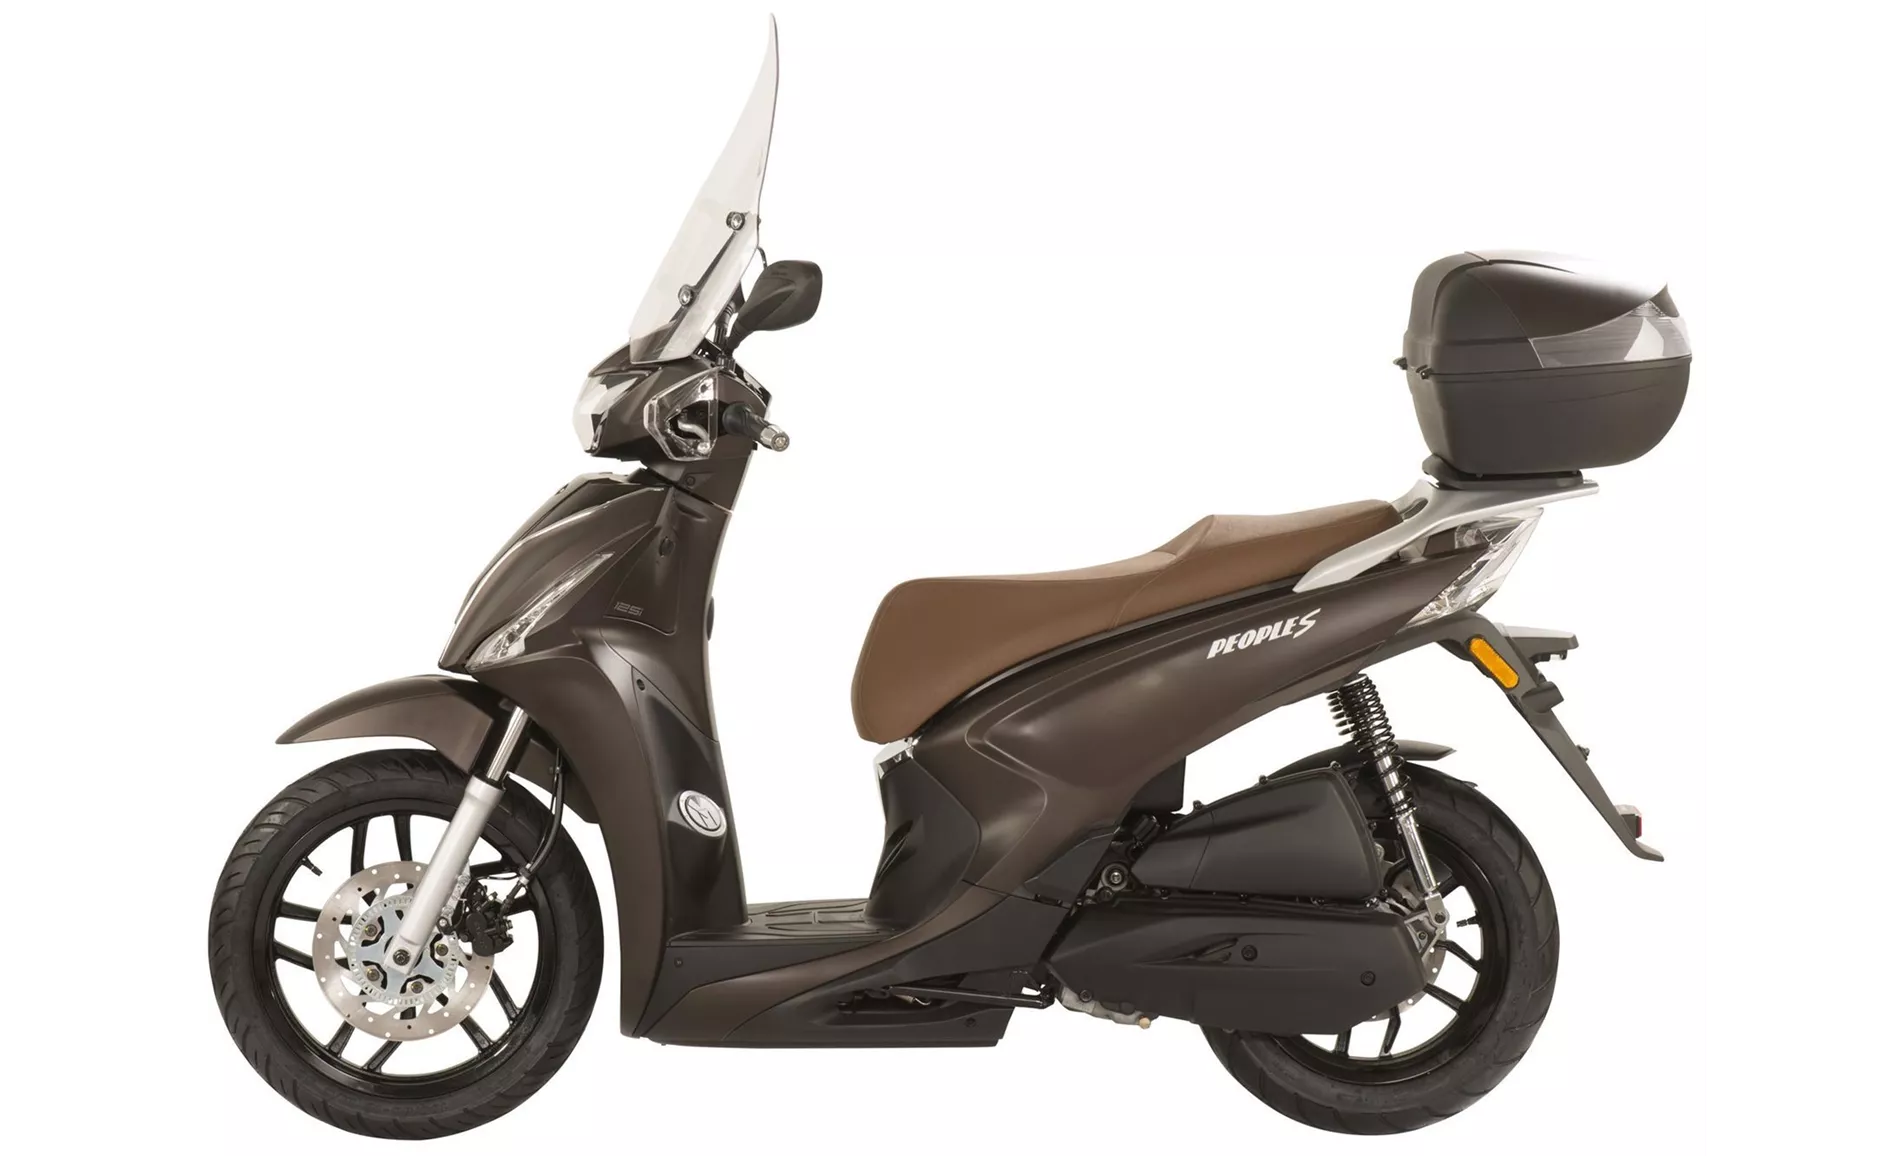 Kymco New People S 125i ABS 2021